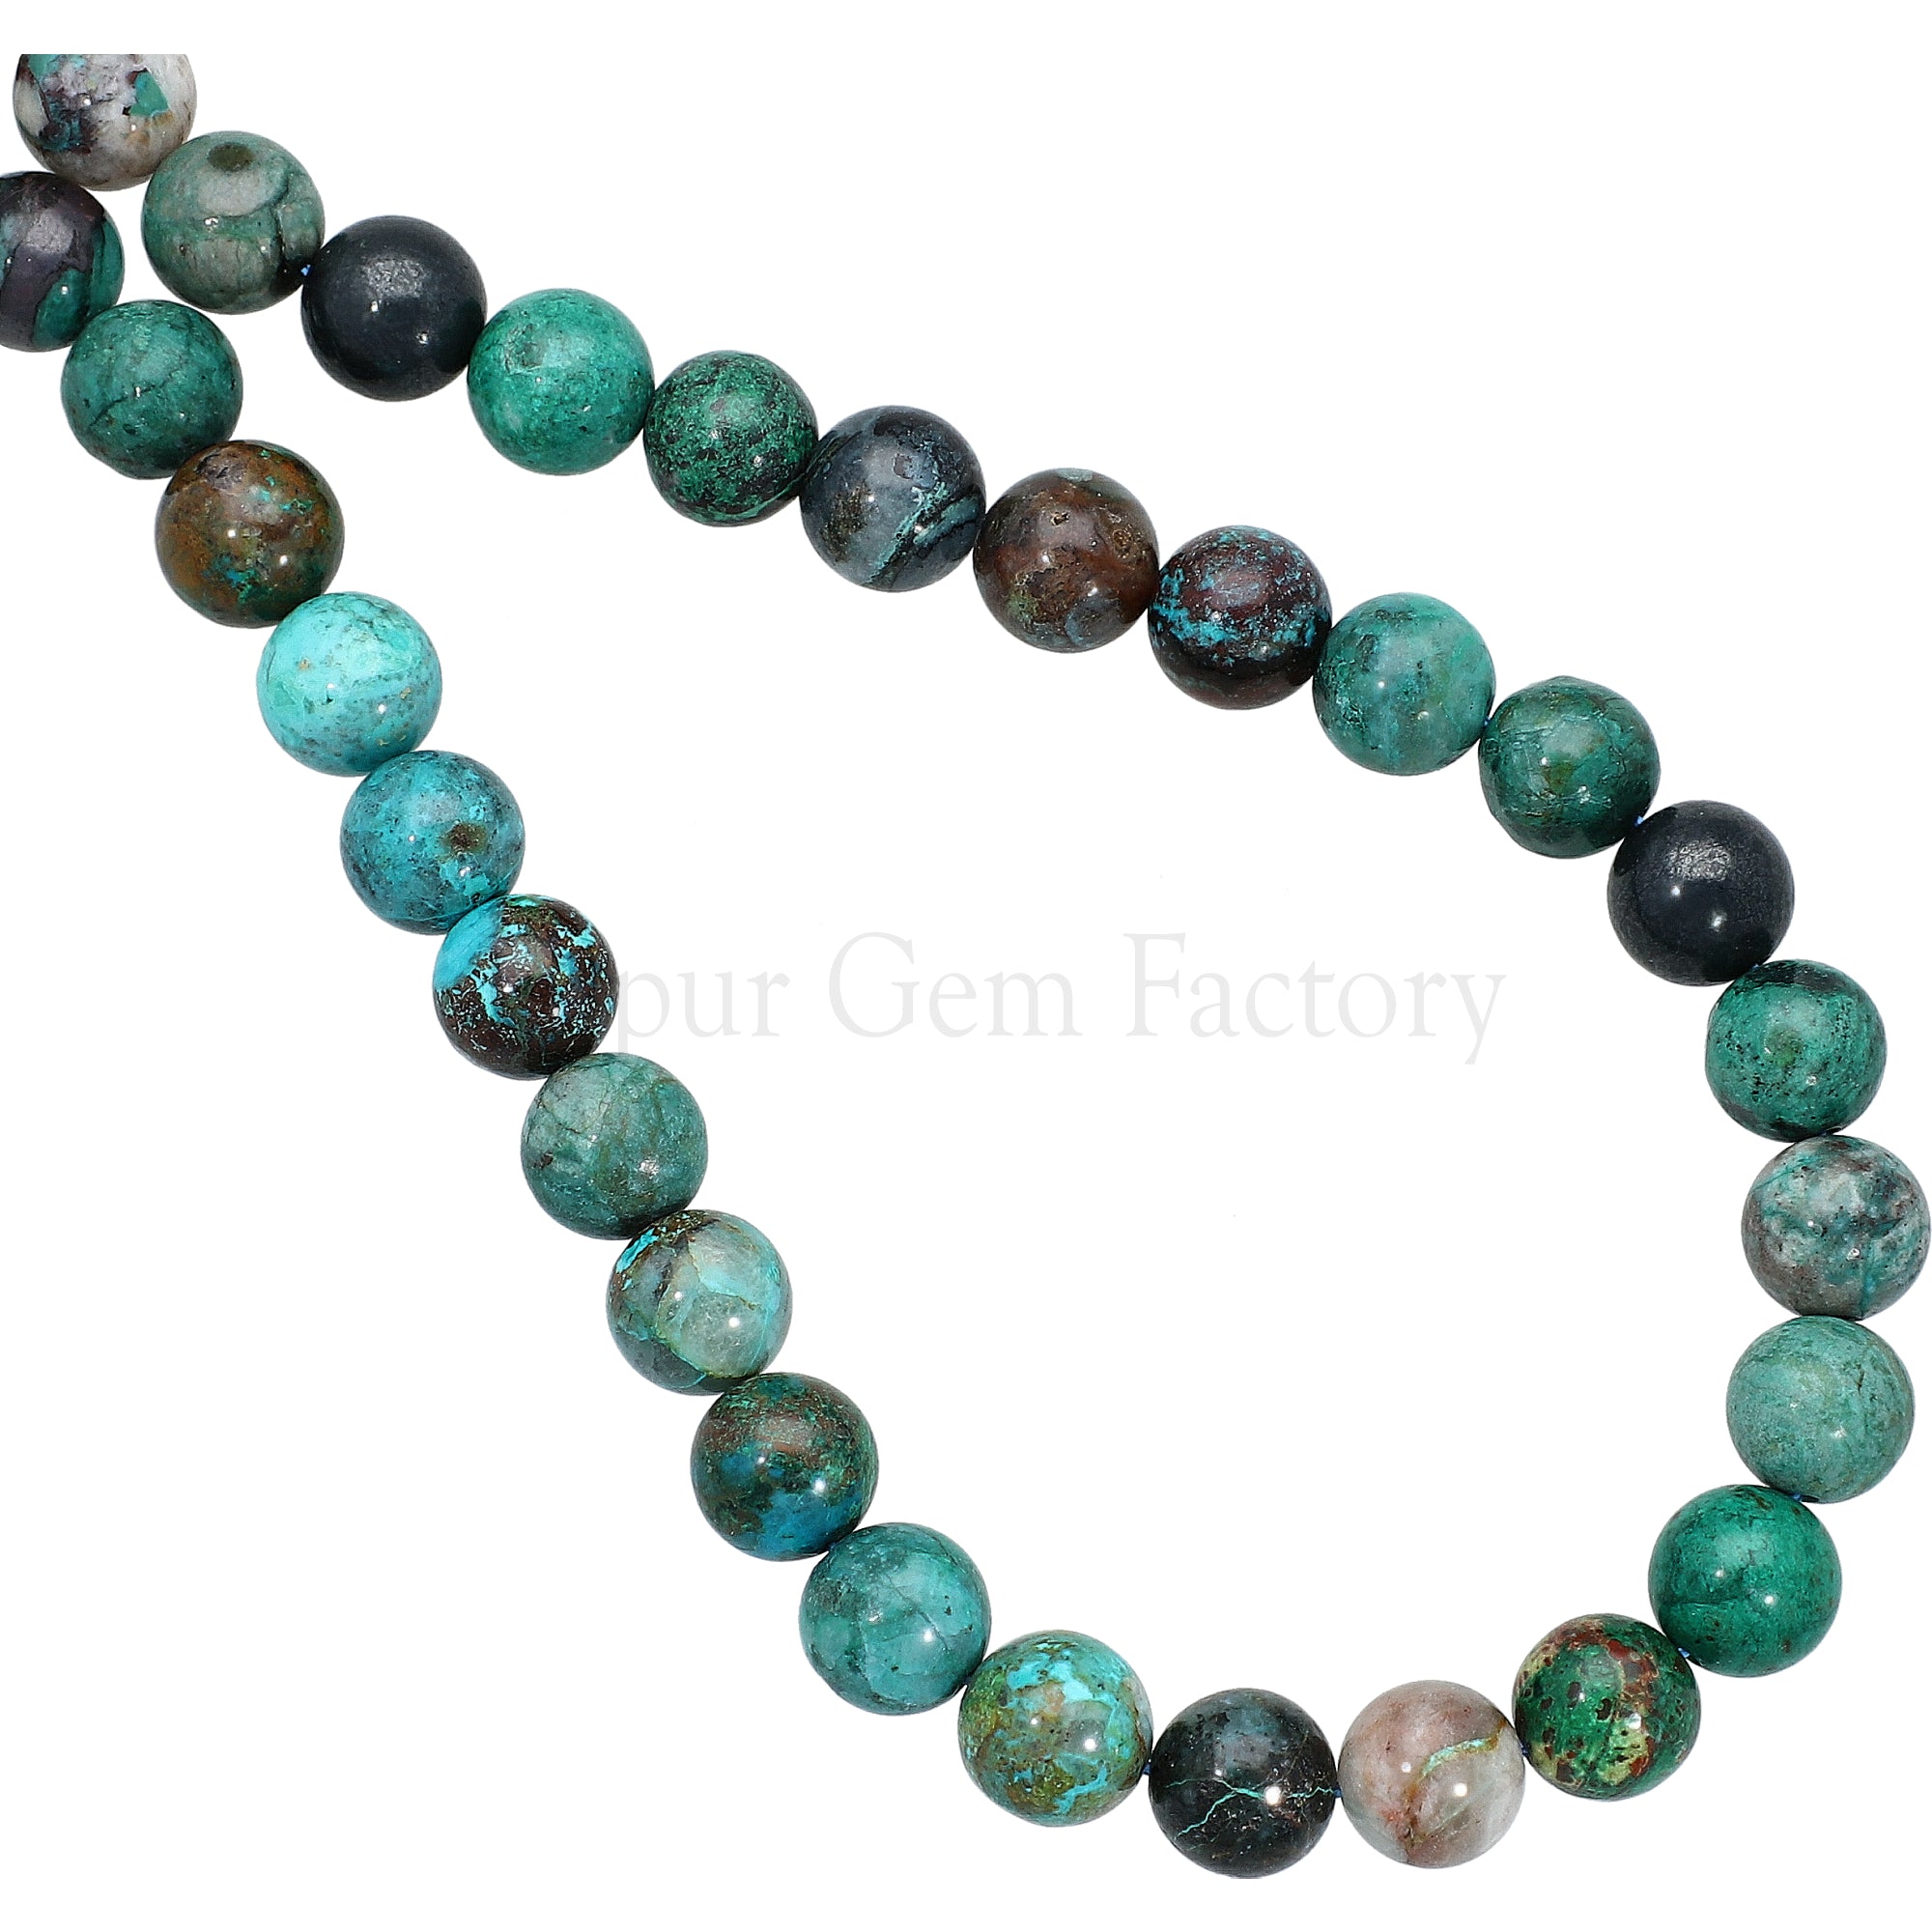 8 MM Natural Chrysocolla Smooth Round Beads 15 Inches Strand